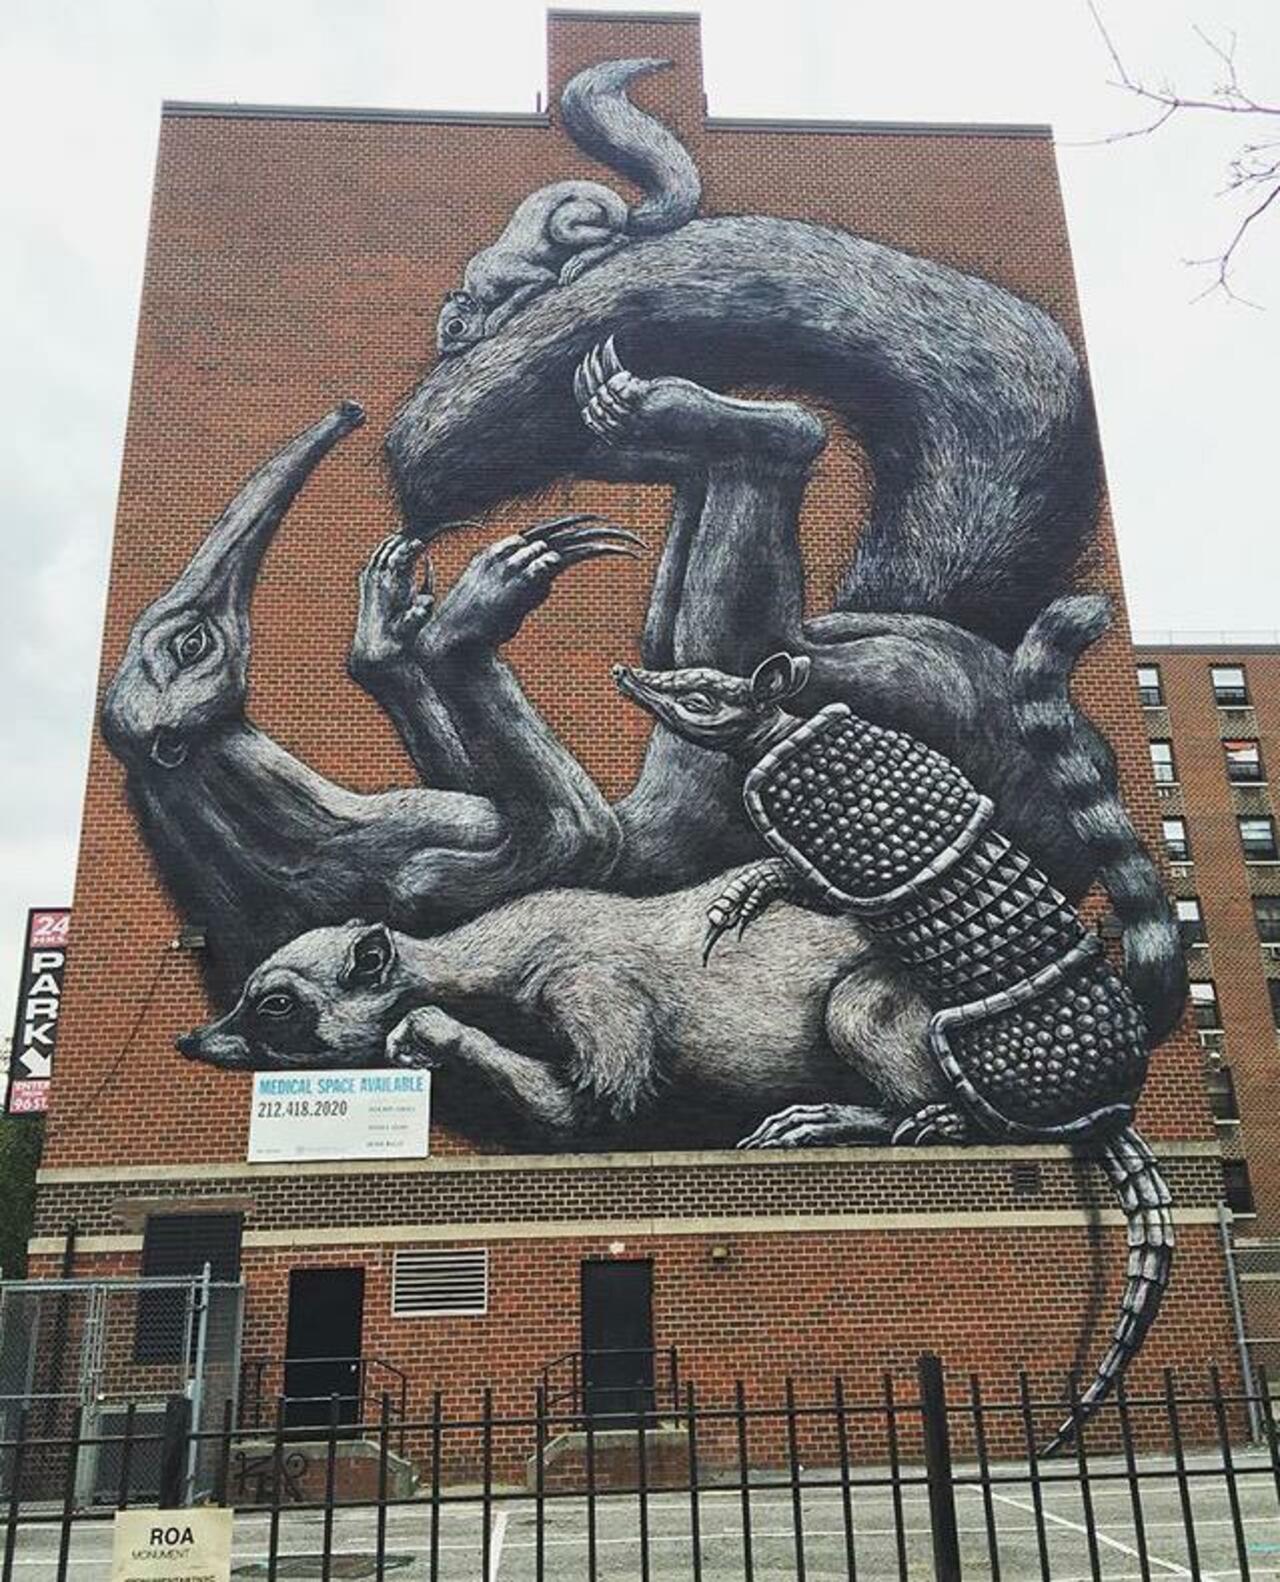 The completed new large scale Street Art wall by ROA in NYC

#art #graffiti #mural #streetart http://t.co/TdKmTL0q0G googlestreetart chin…